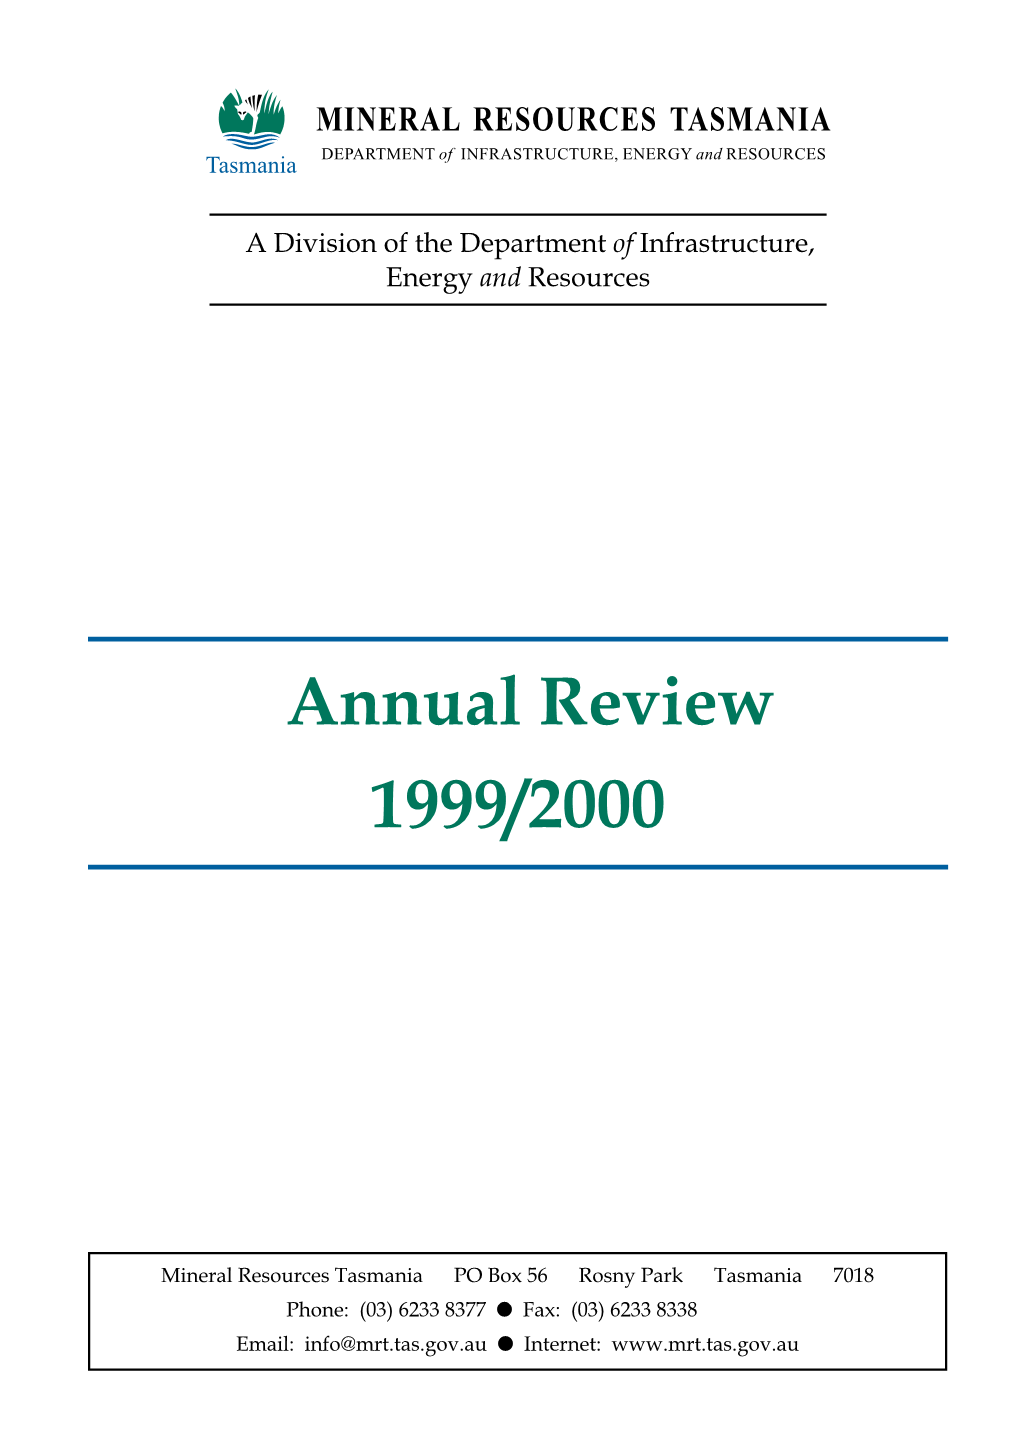 Annual Review 1999/2000